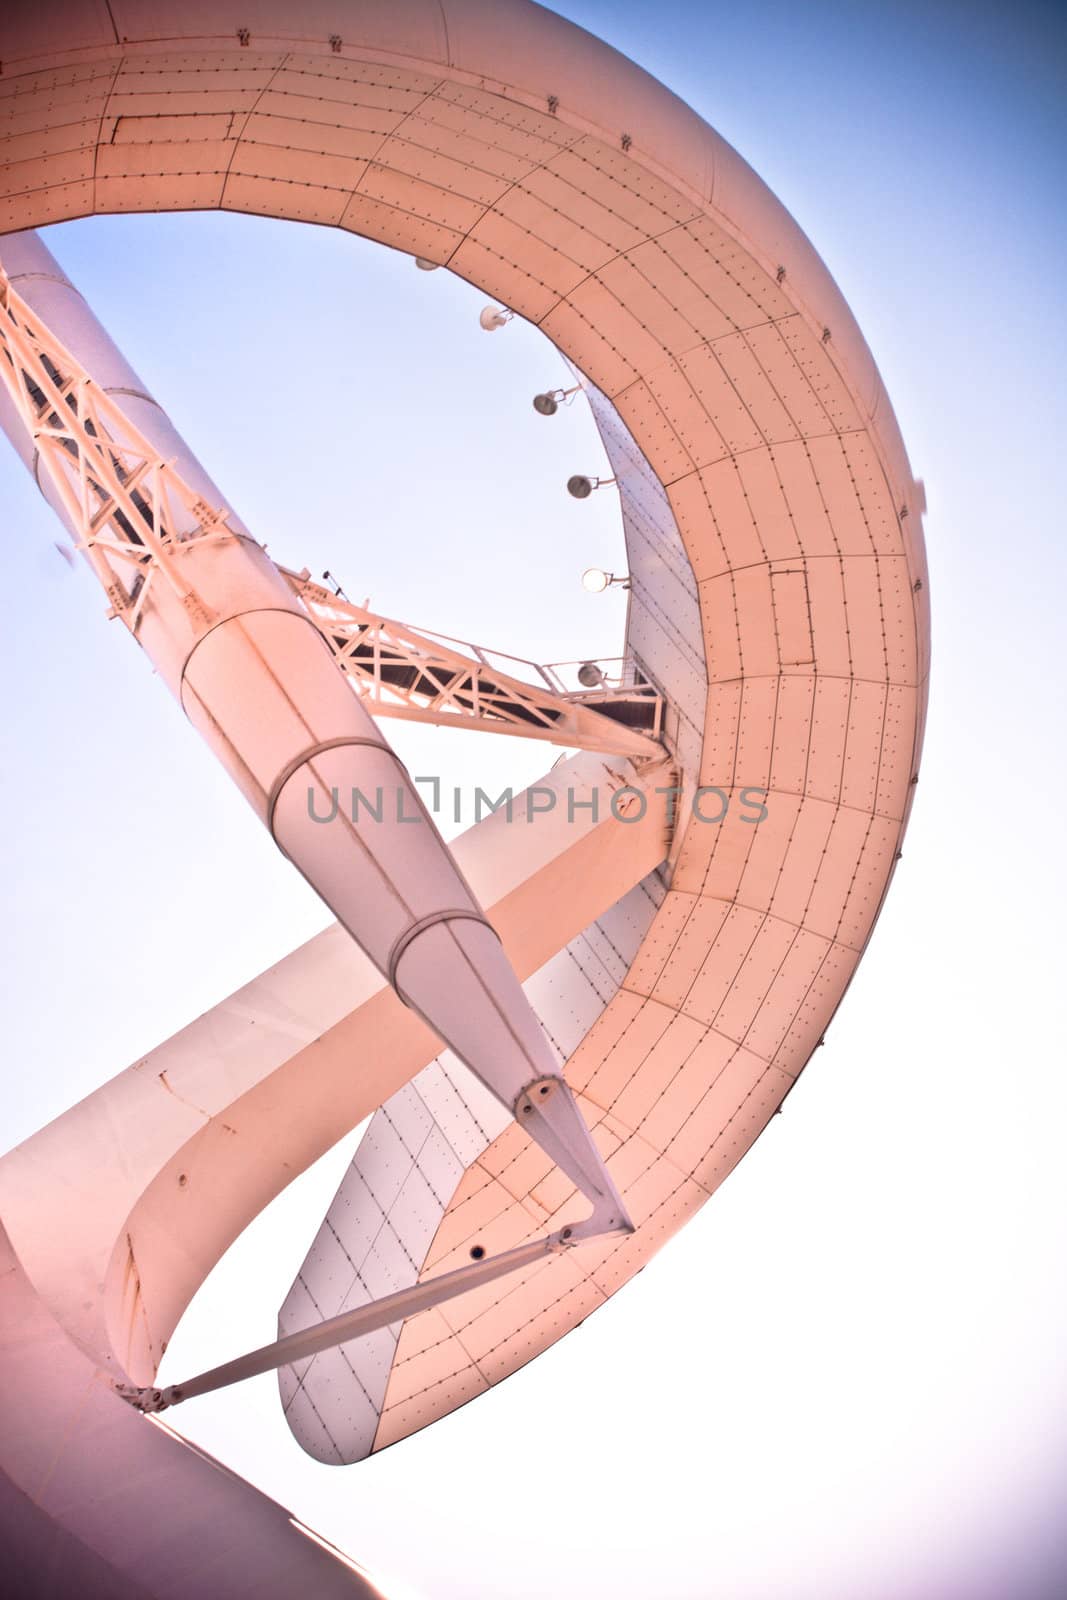 Close-up image of the beautiful Montjuïc Communications Tower also known as Torre Calatrava and Torre Telefónica in Barcelona, Spain.